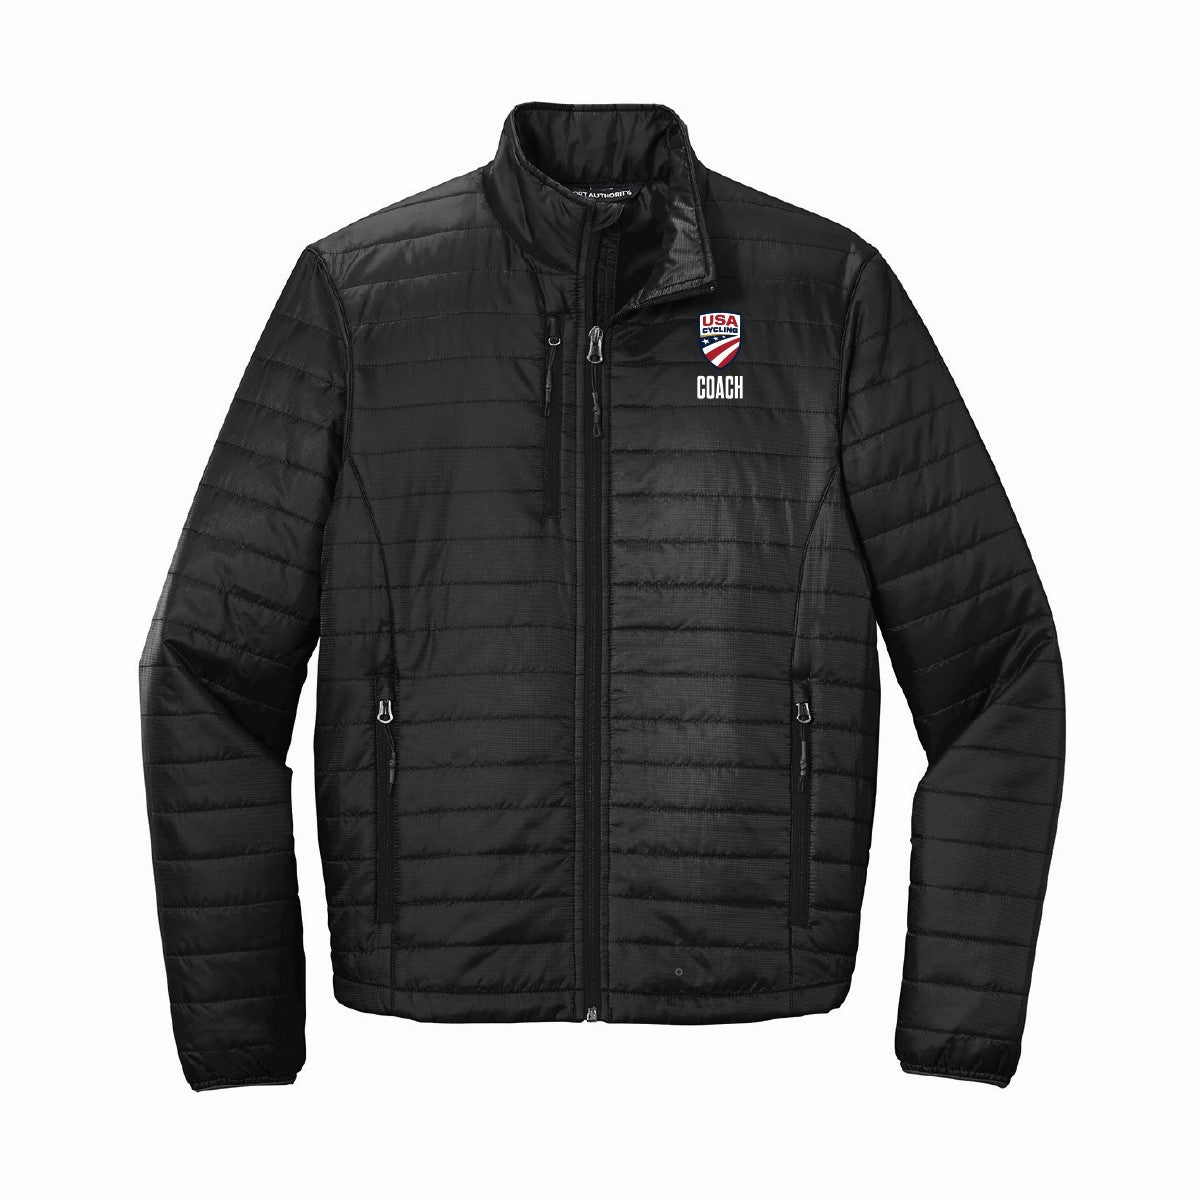 Men's USA Cycling Coach Packable Puffy Jacket